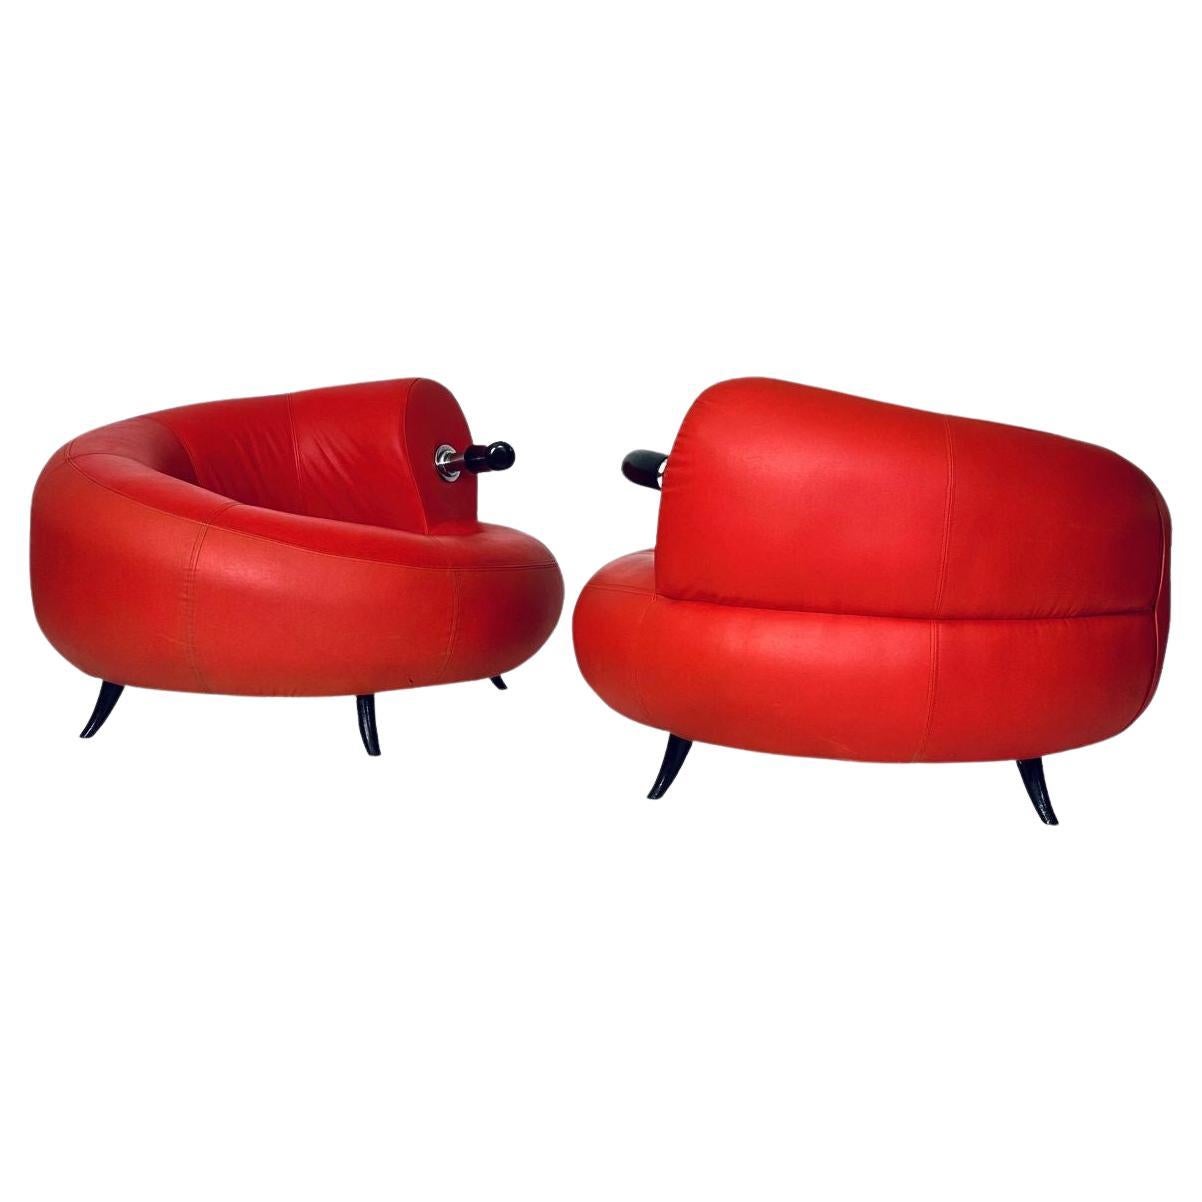 Pair Red Leather Post Modern Lounge Chairs, Italy, 1990 For Sale